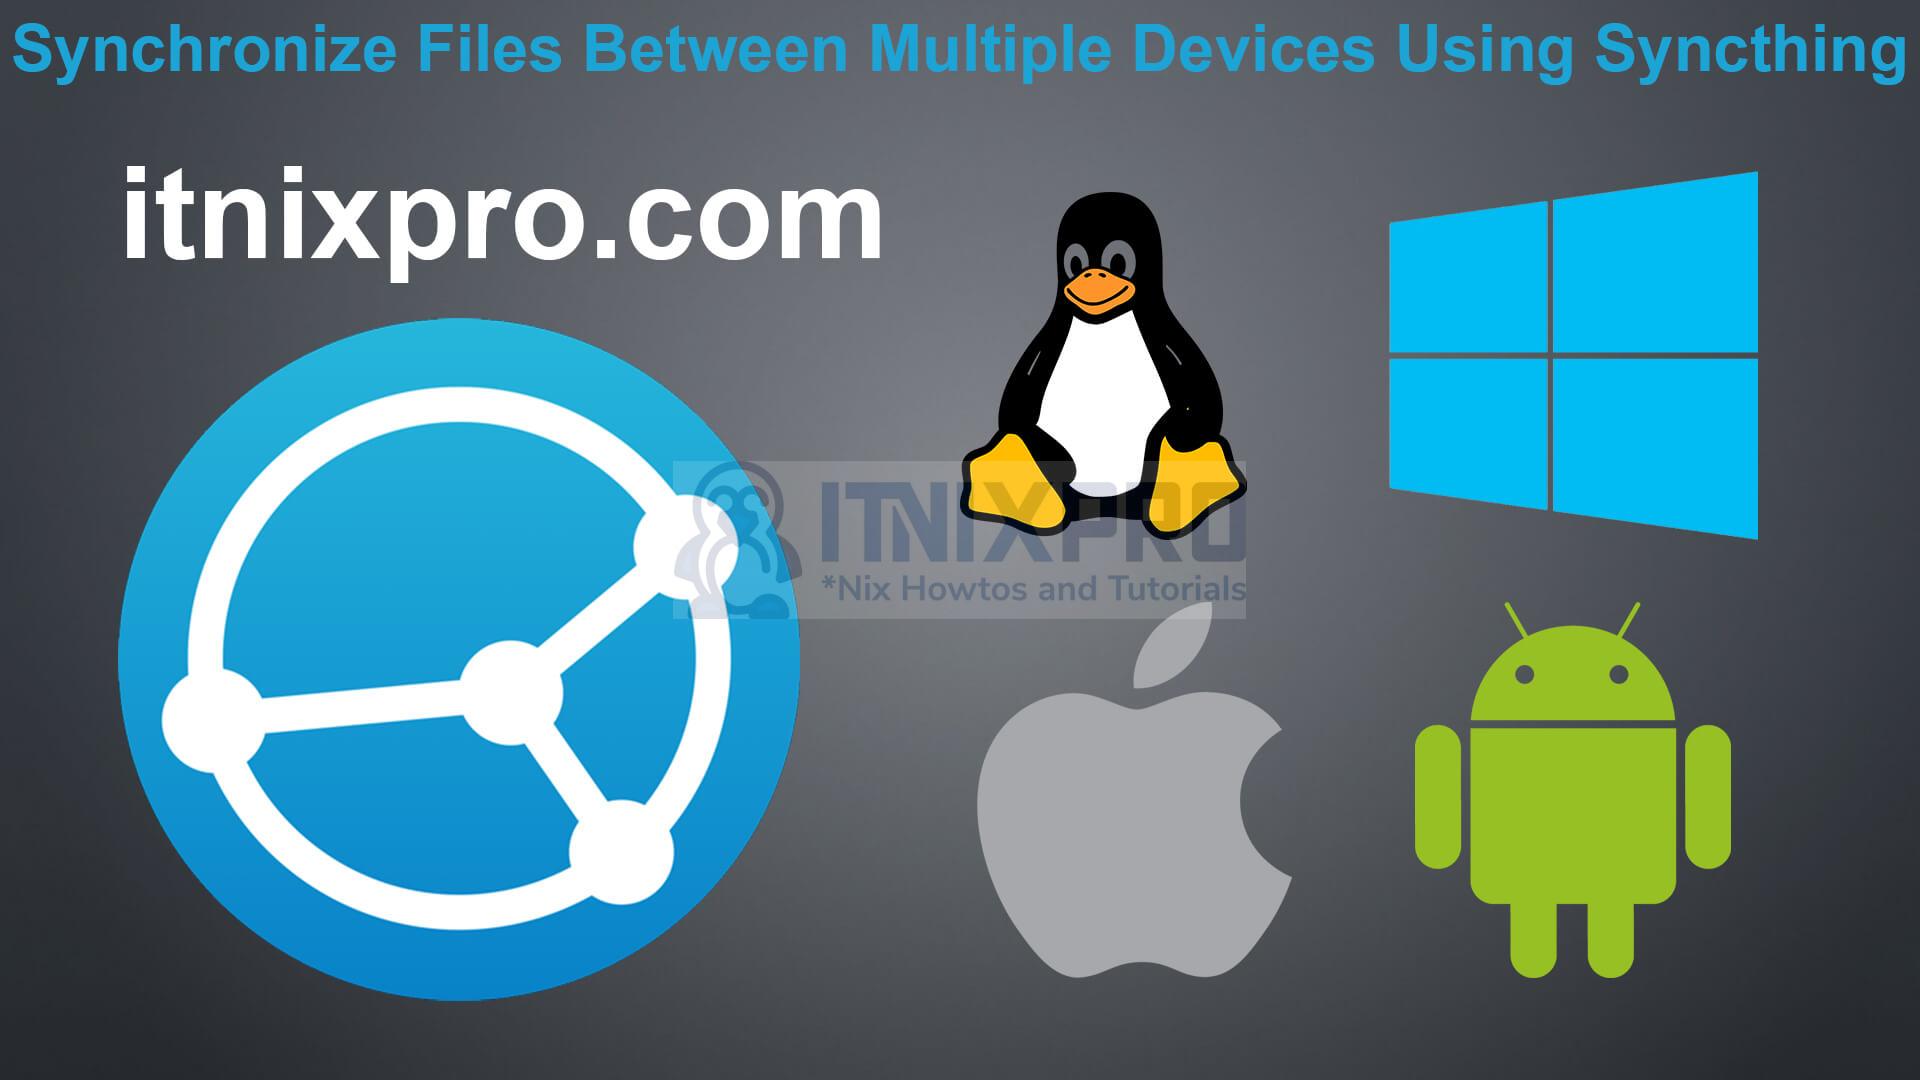 Synchronize Files between multiple devices using Syncthing